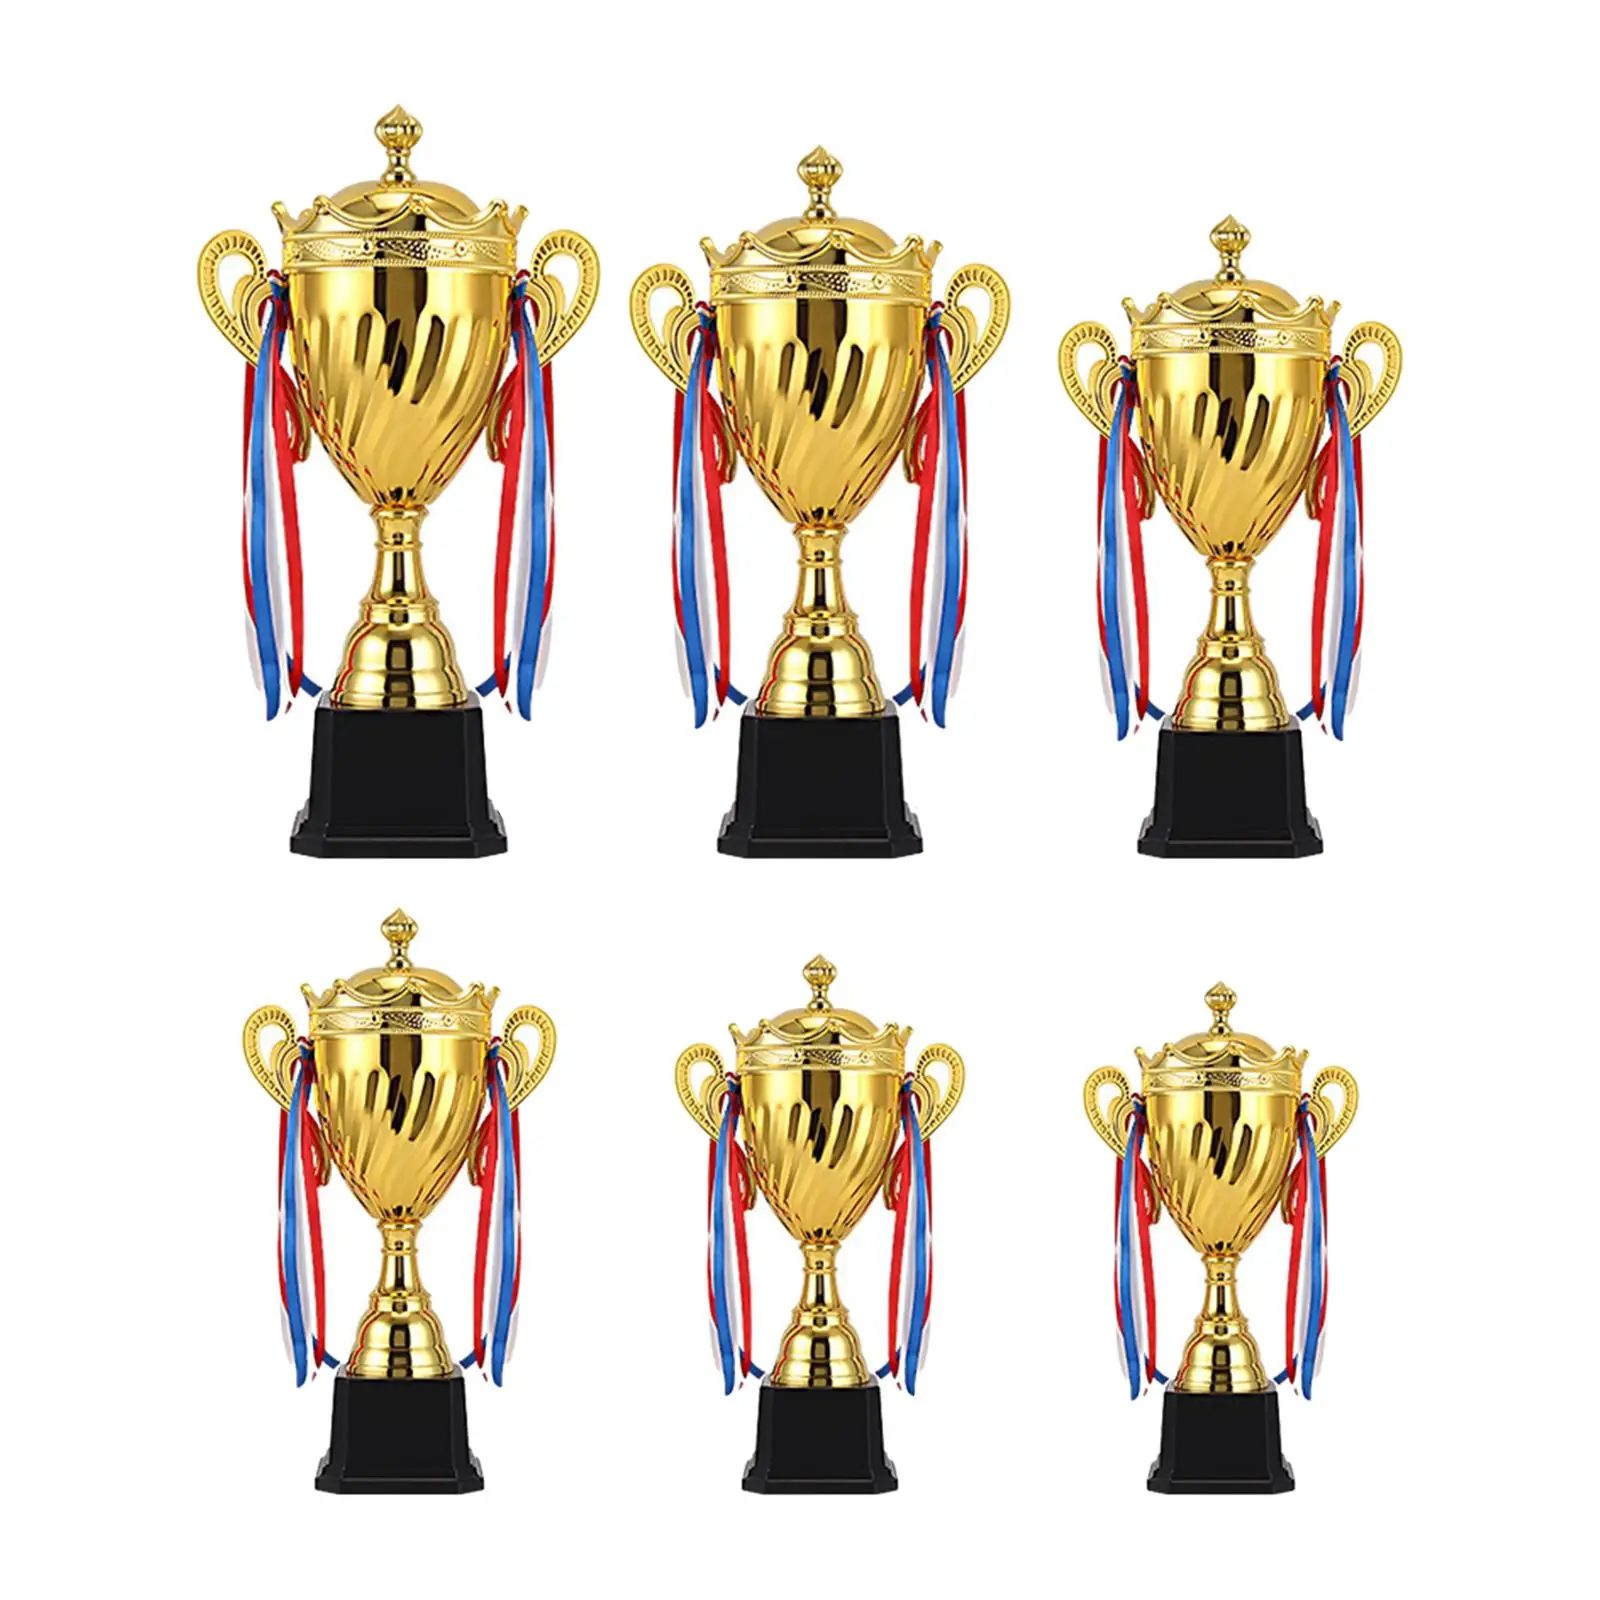 Trophy Award Party Favors Sports Classroom Award Competitions Celebrations with Base Competitions for Kids Adults Winning Prizes